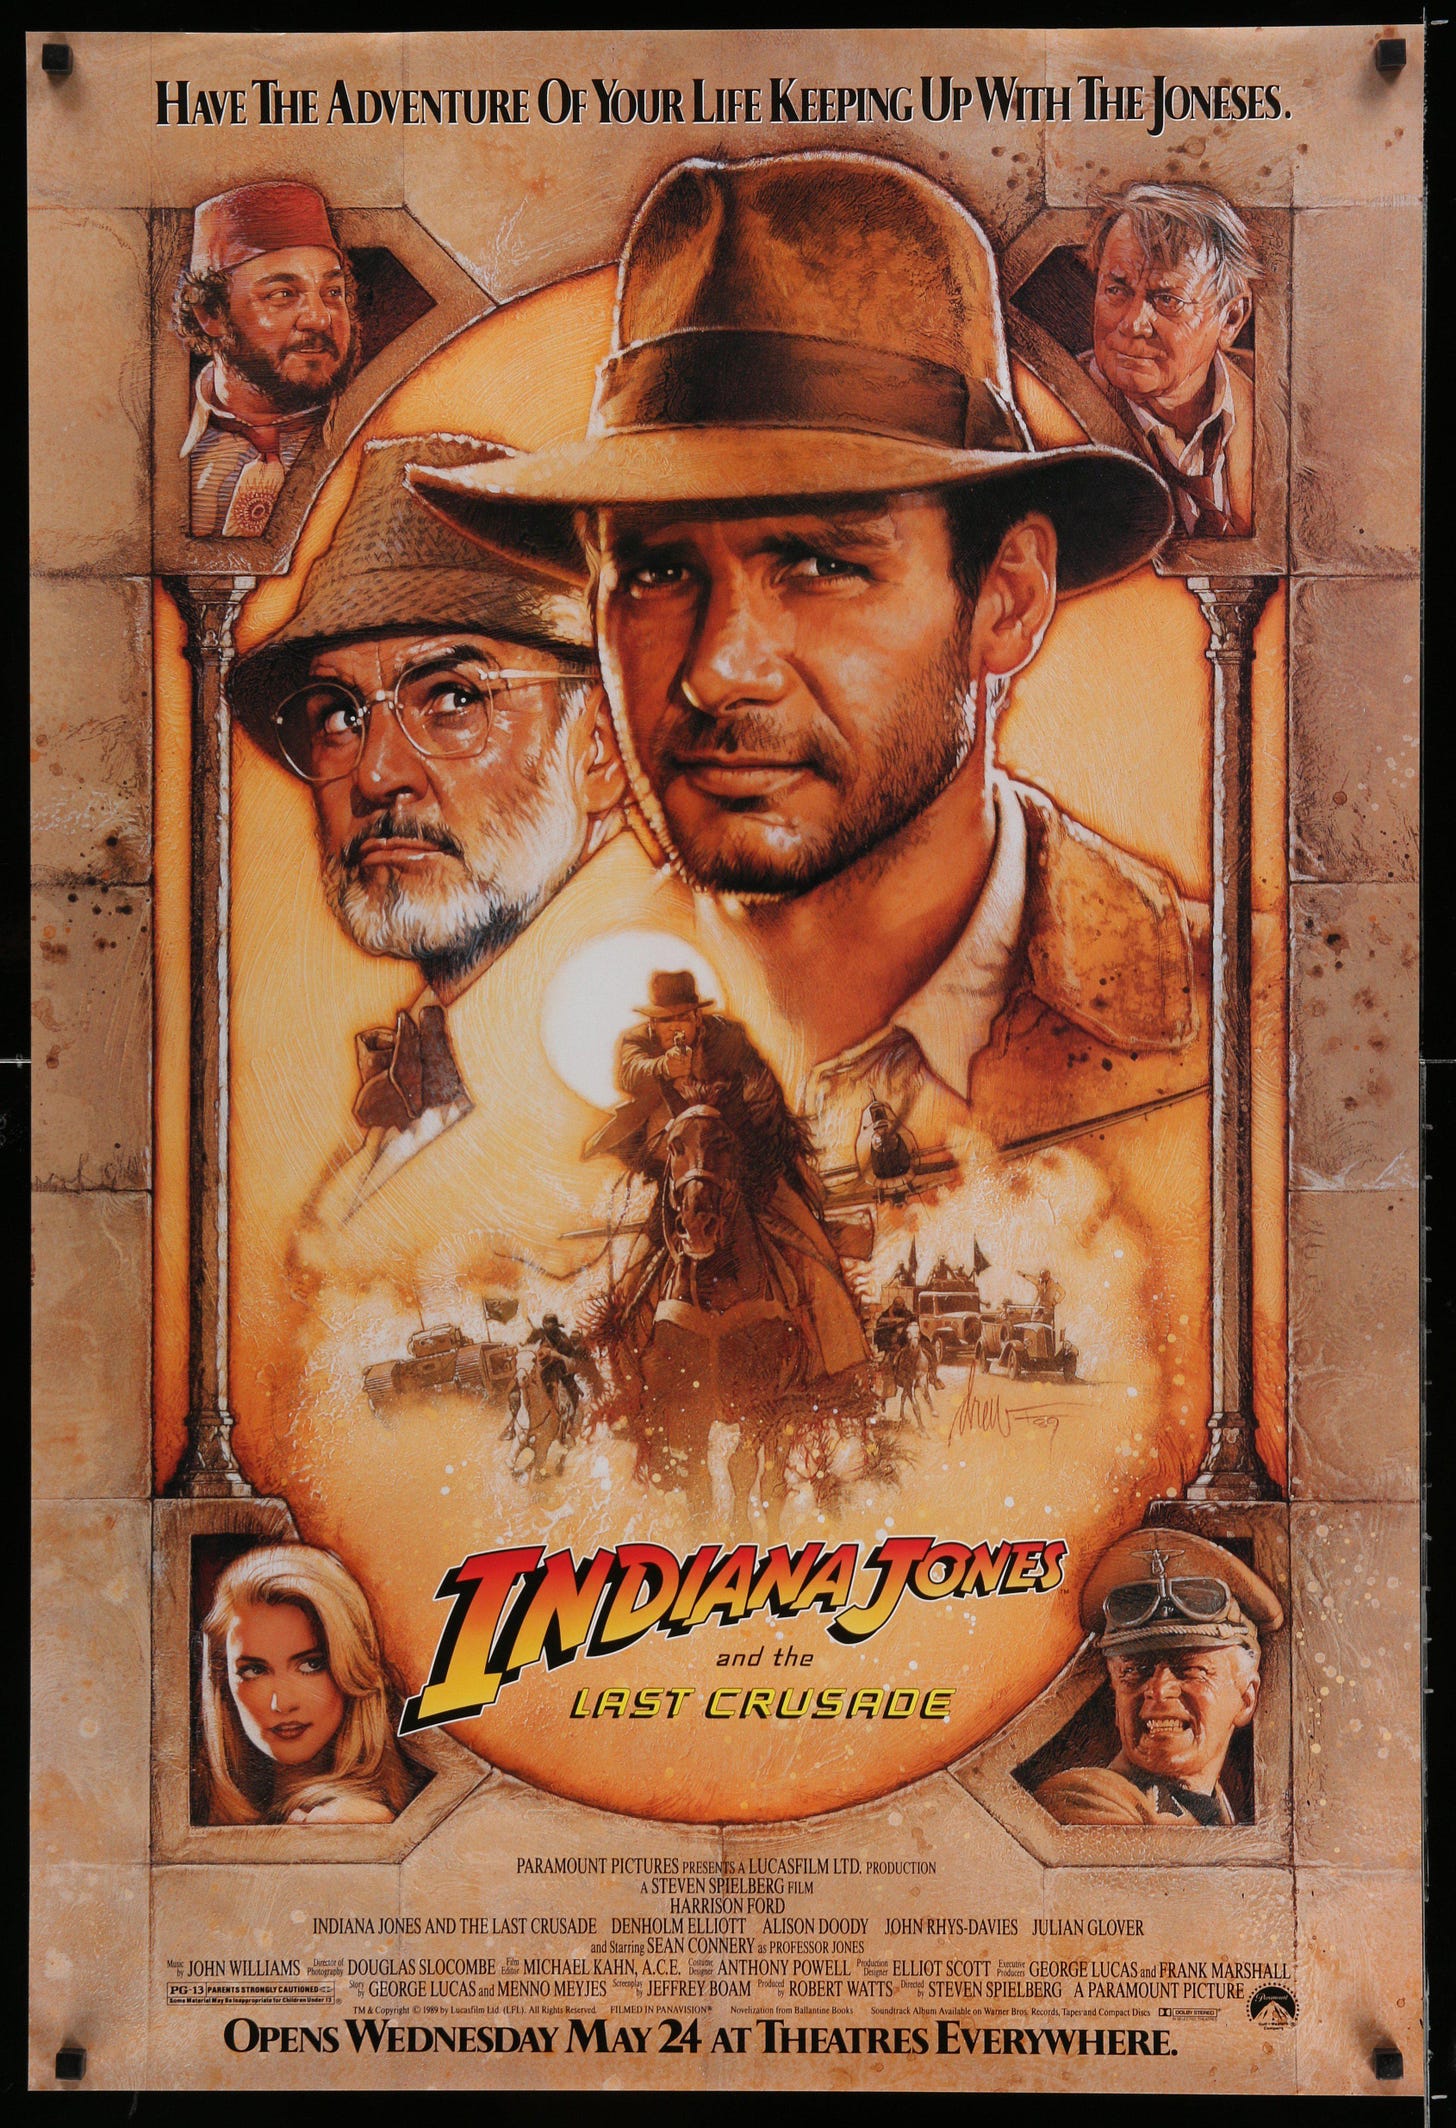 INDIANA JONES AND THE LAST CRUSADE movie poster